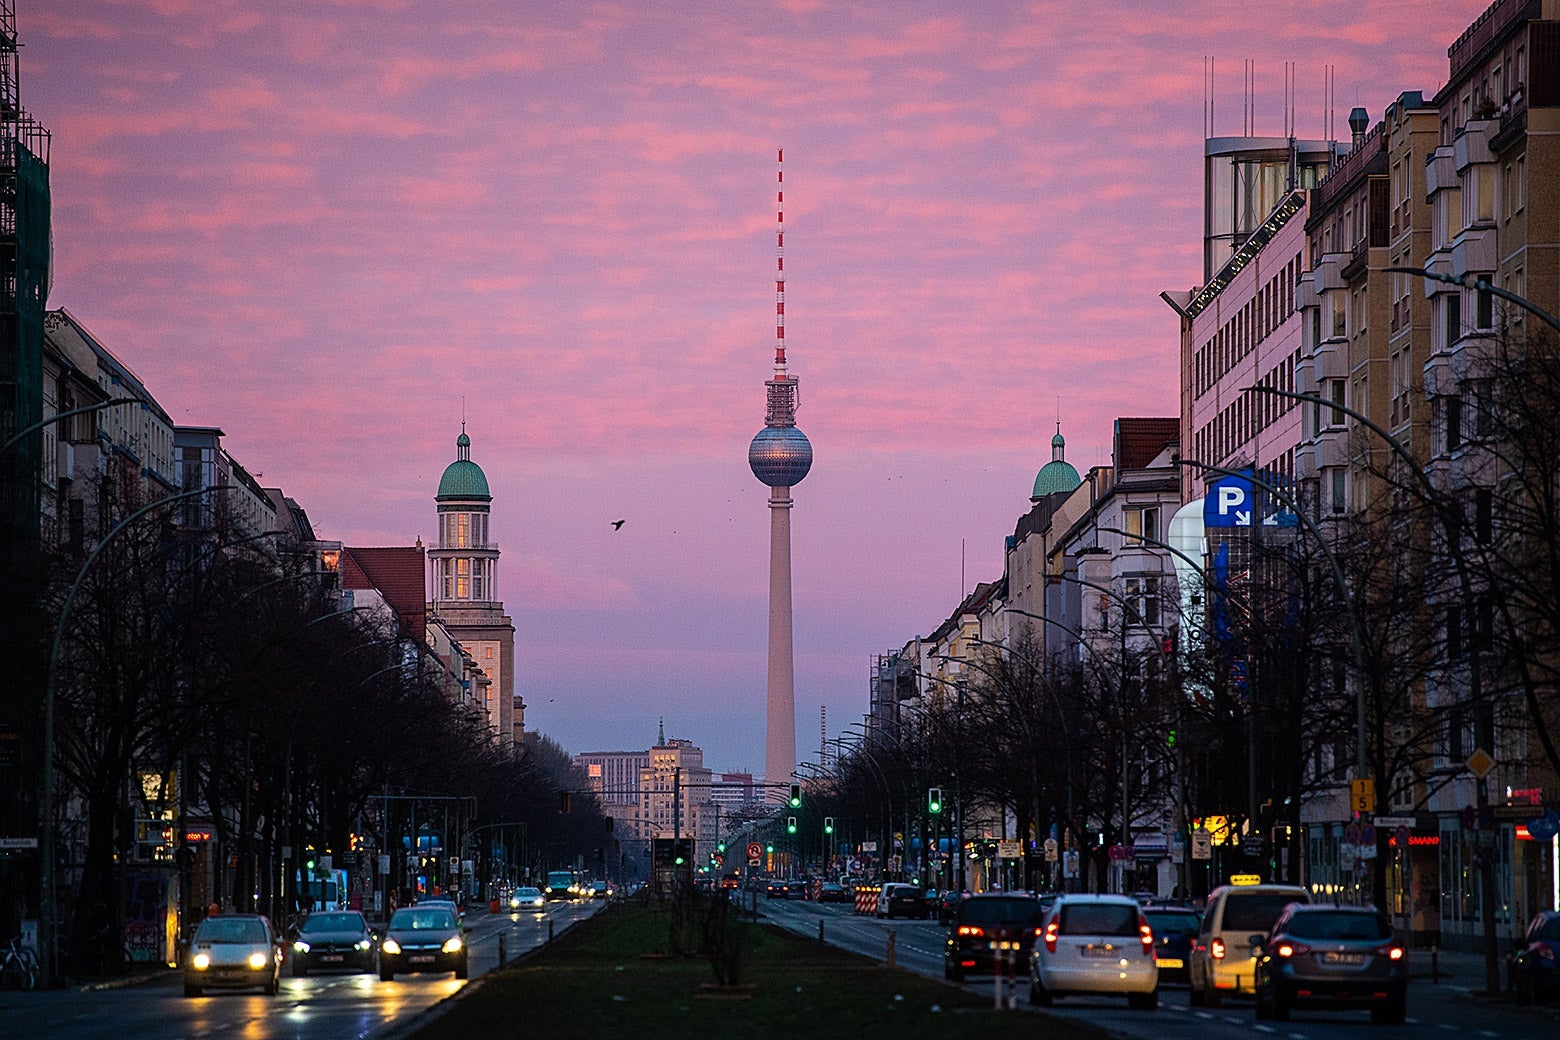 A Berlin street at sunrise with the TV Tower in the background